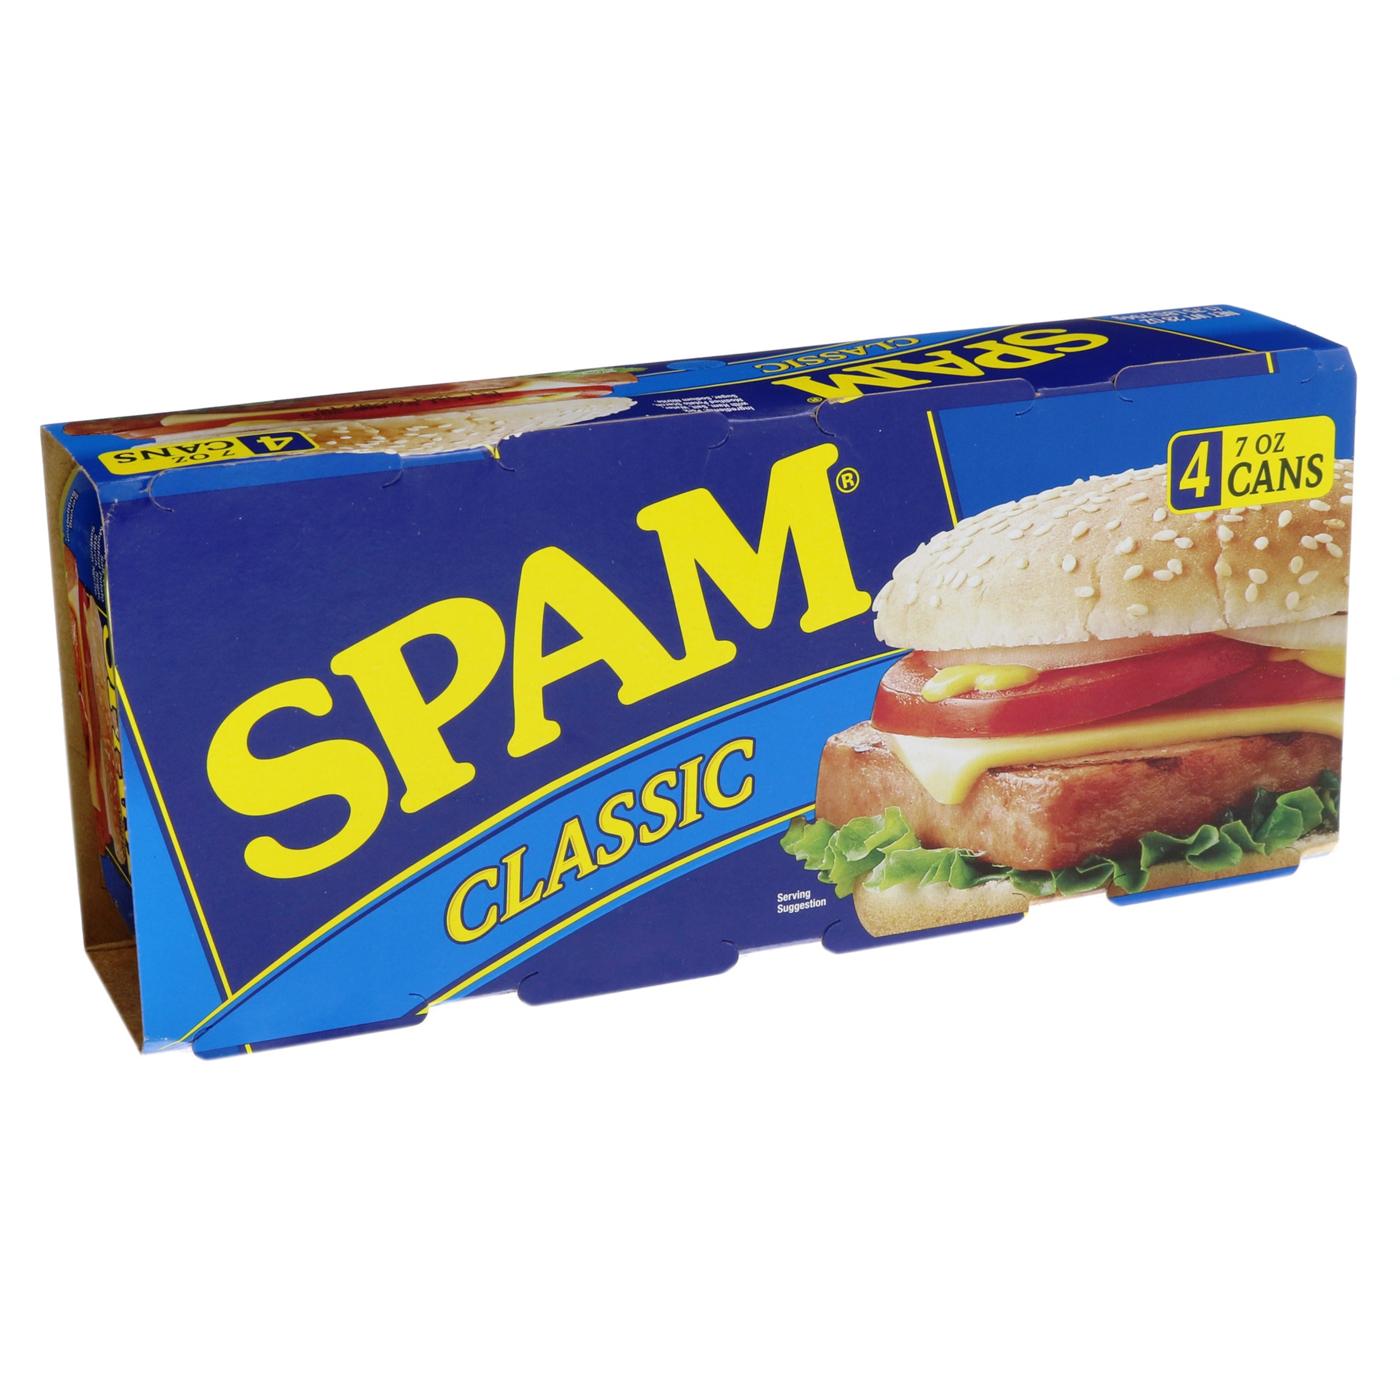 SPAM Classic, 12 oz (2 Pack Canned) 